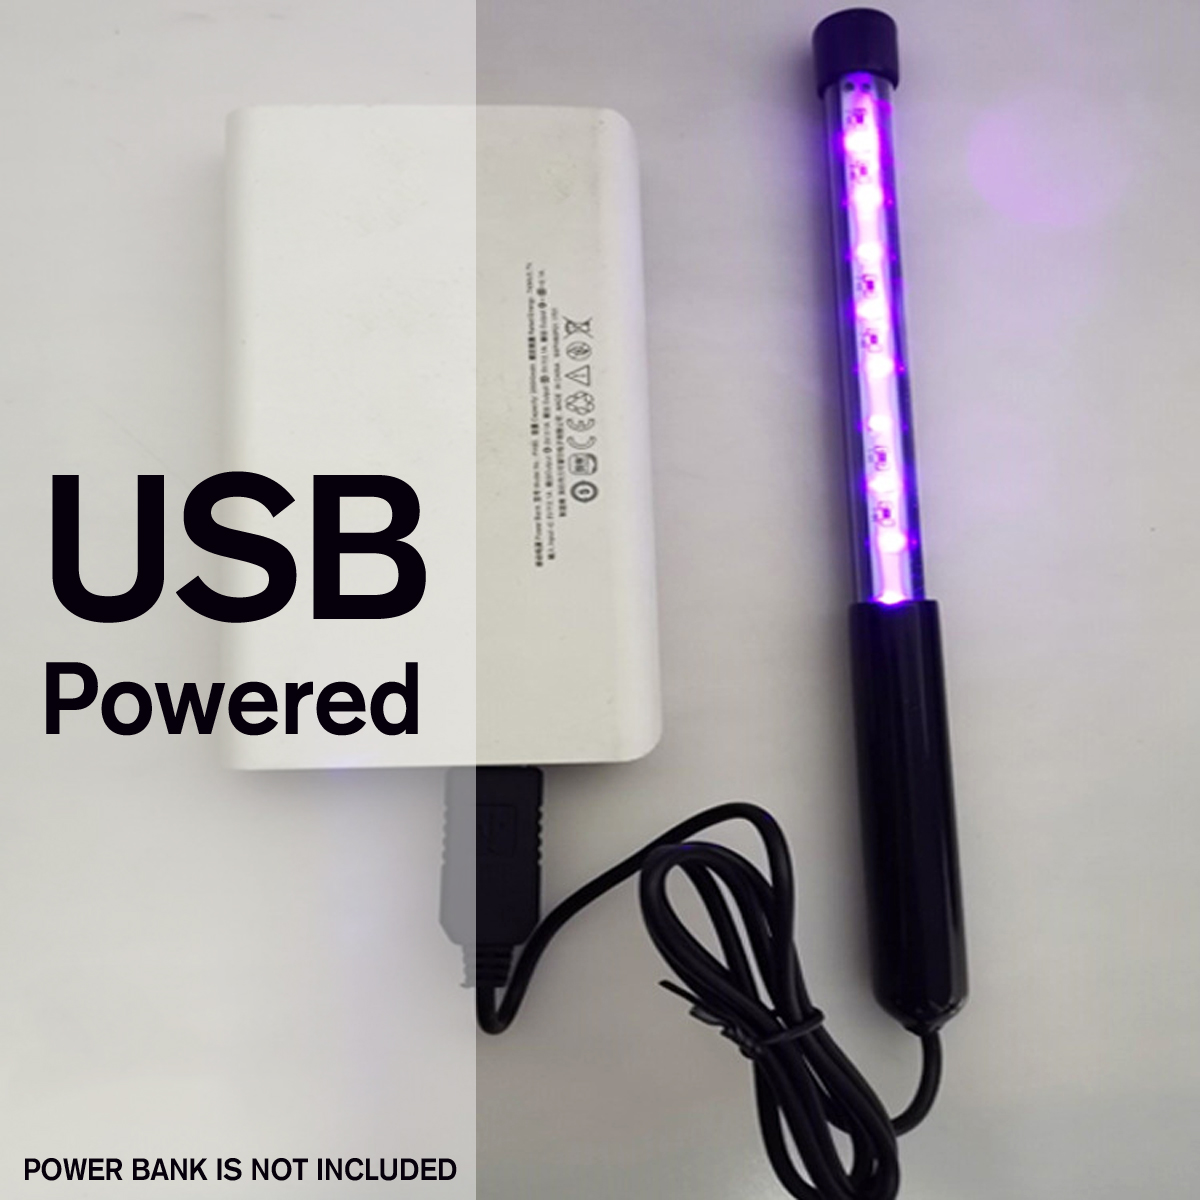 Mobile-UV-Disinfection-Lamp-USB-Charging-Portable-Disinfection-Stick-Uv-Mask-Germicidal-Lamp-Rod-Ste-1689247-2